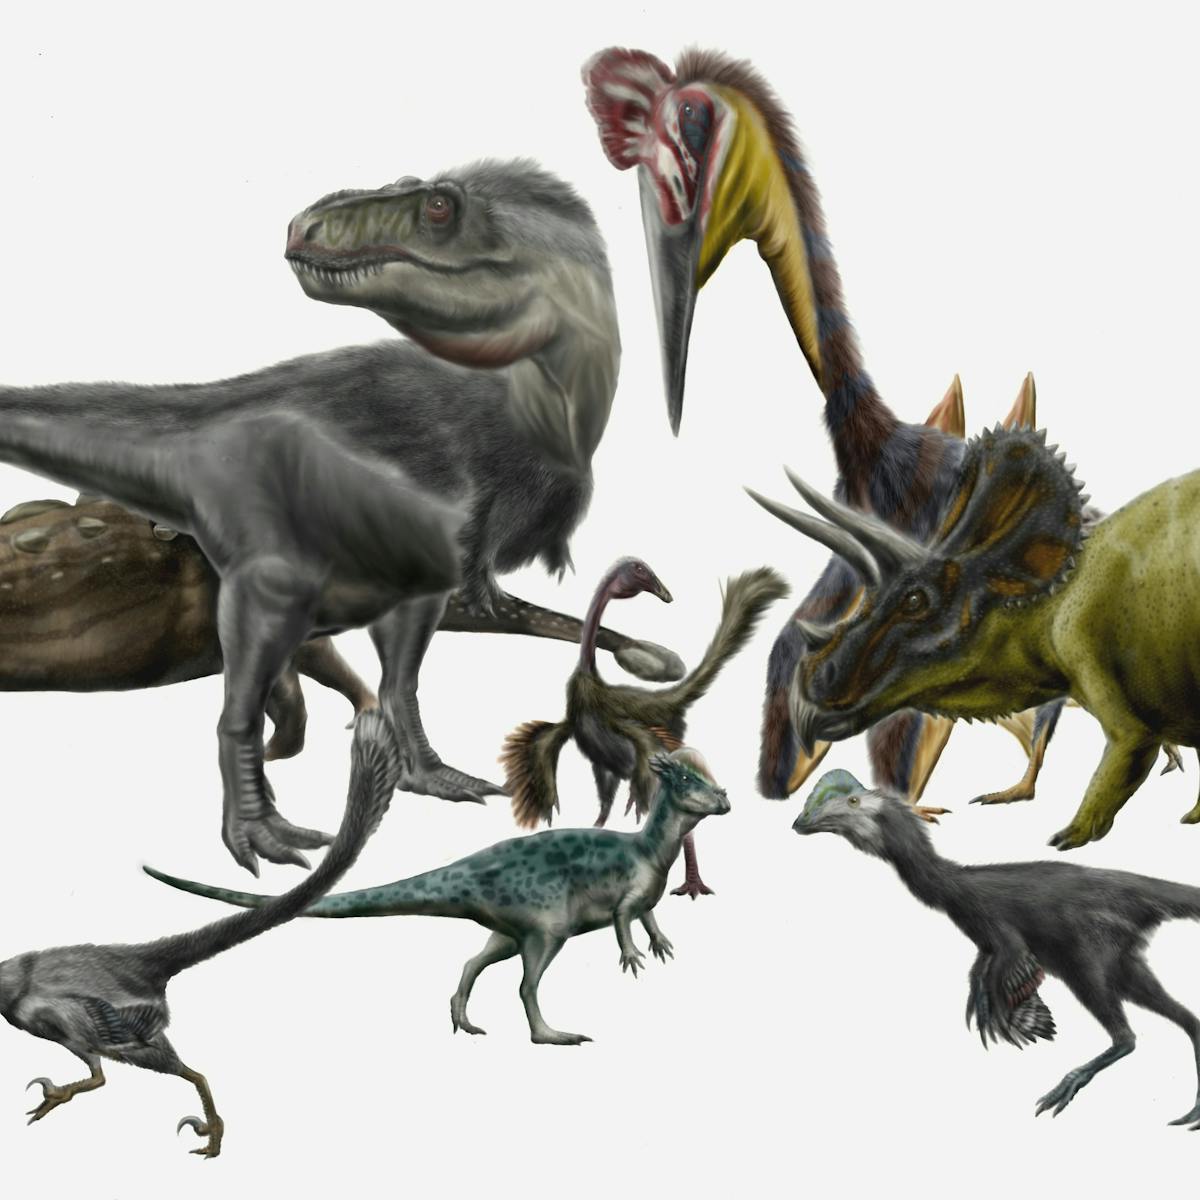 Why were there so many dinosaur species?